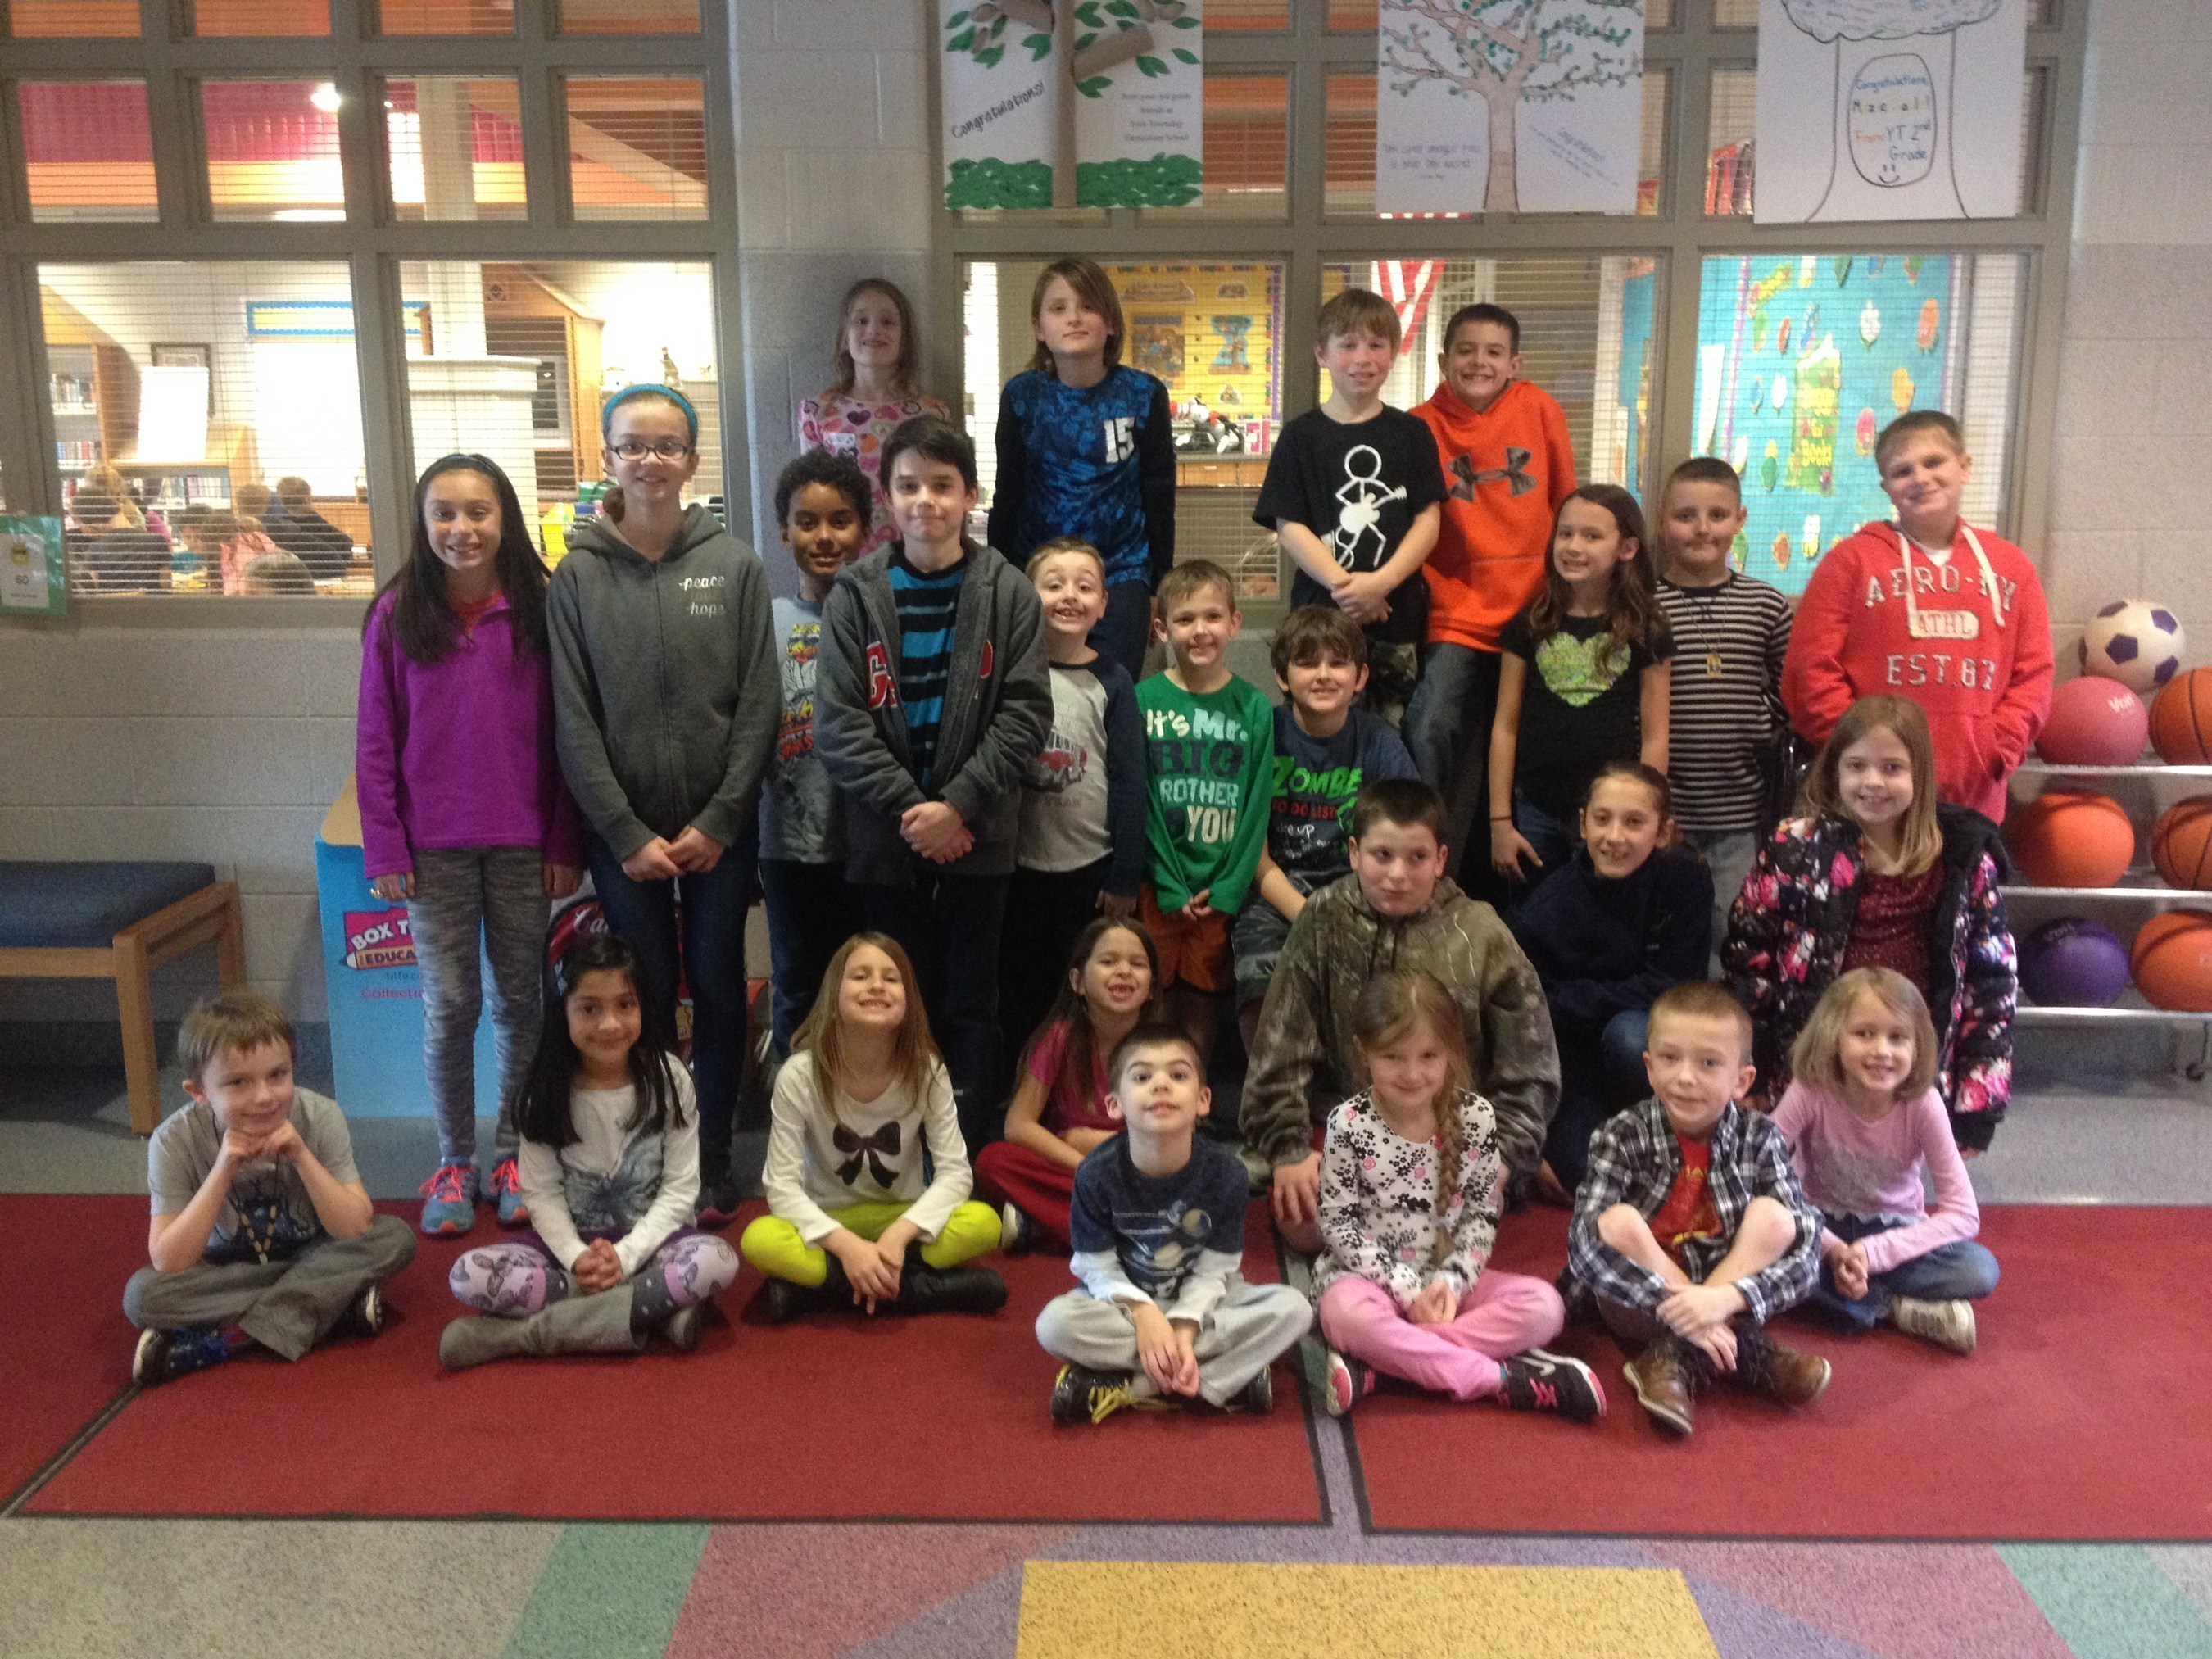 The students of Mazie Gable Elementary School in Red Lion, PA